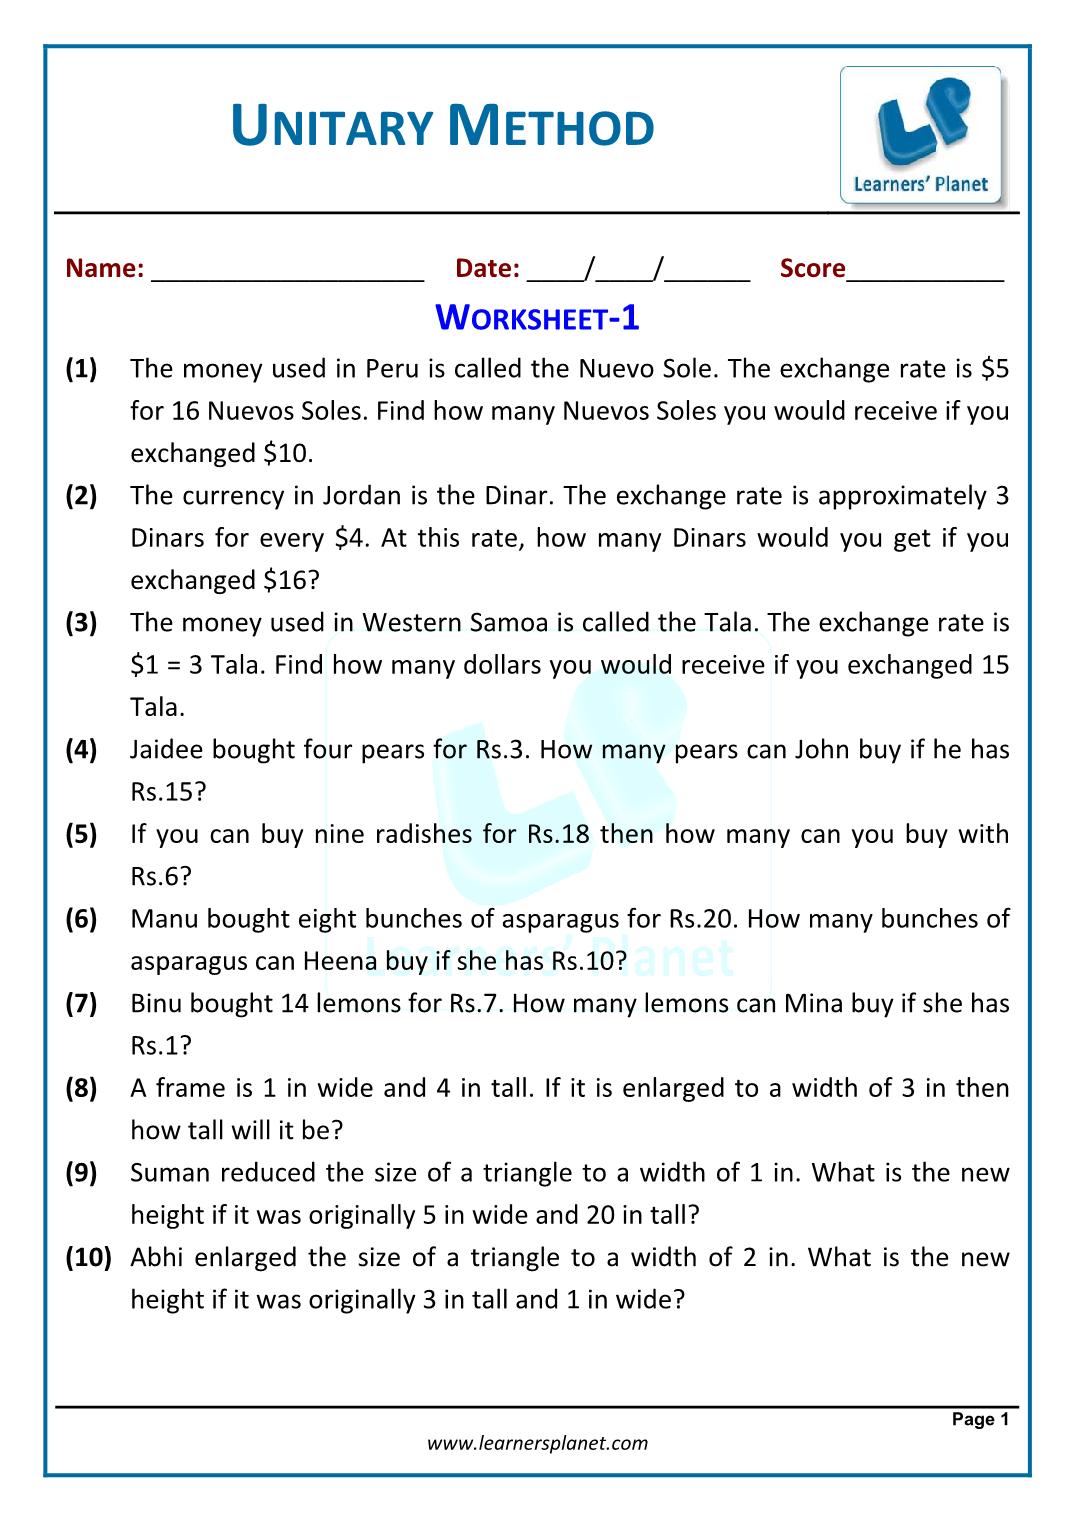 Unitary-Method-Word-Problems-Workbook-20 With Linear Equation Word Problems Worksheet